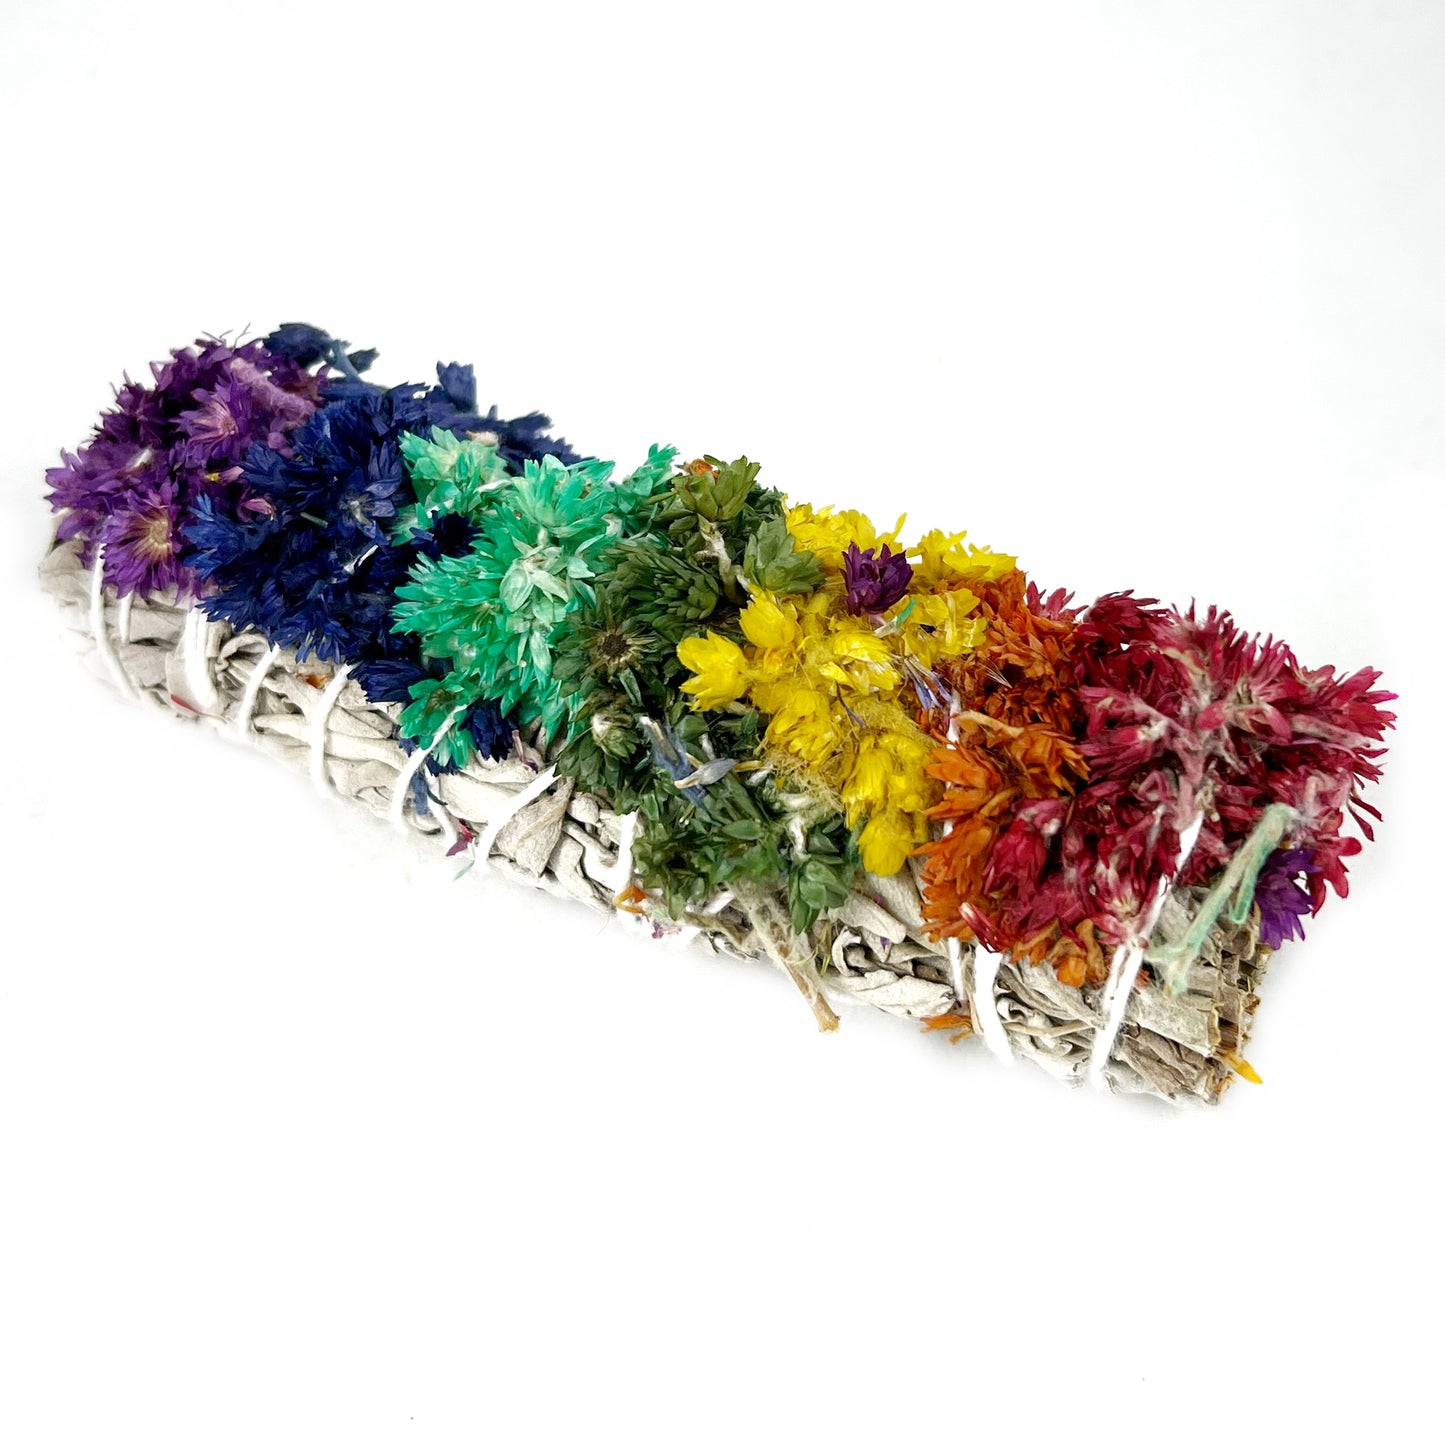 4" white sage bundle with chakra colored sinuata flowers